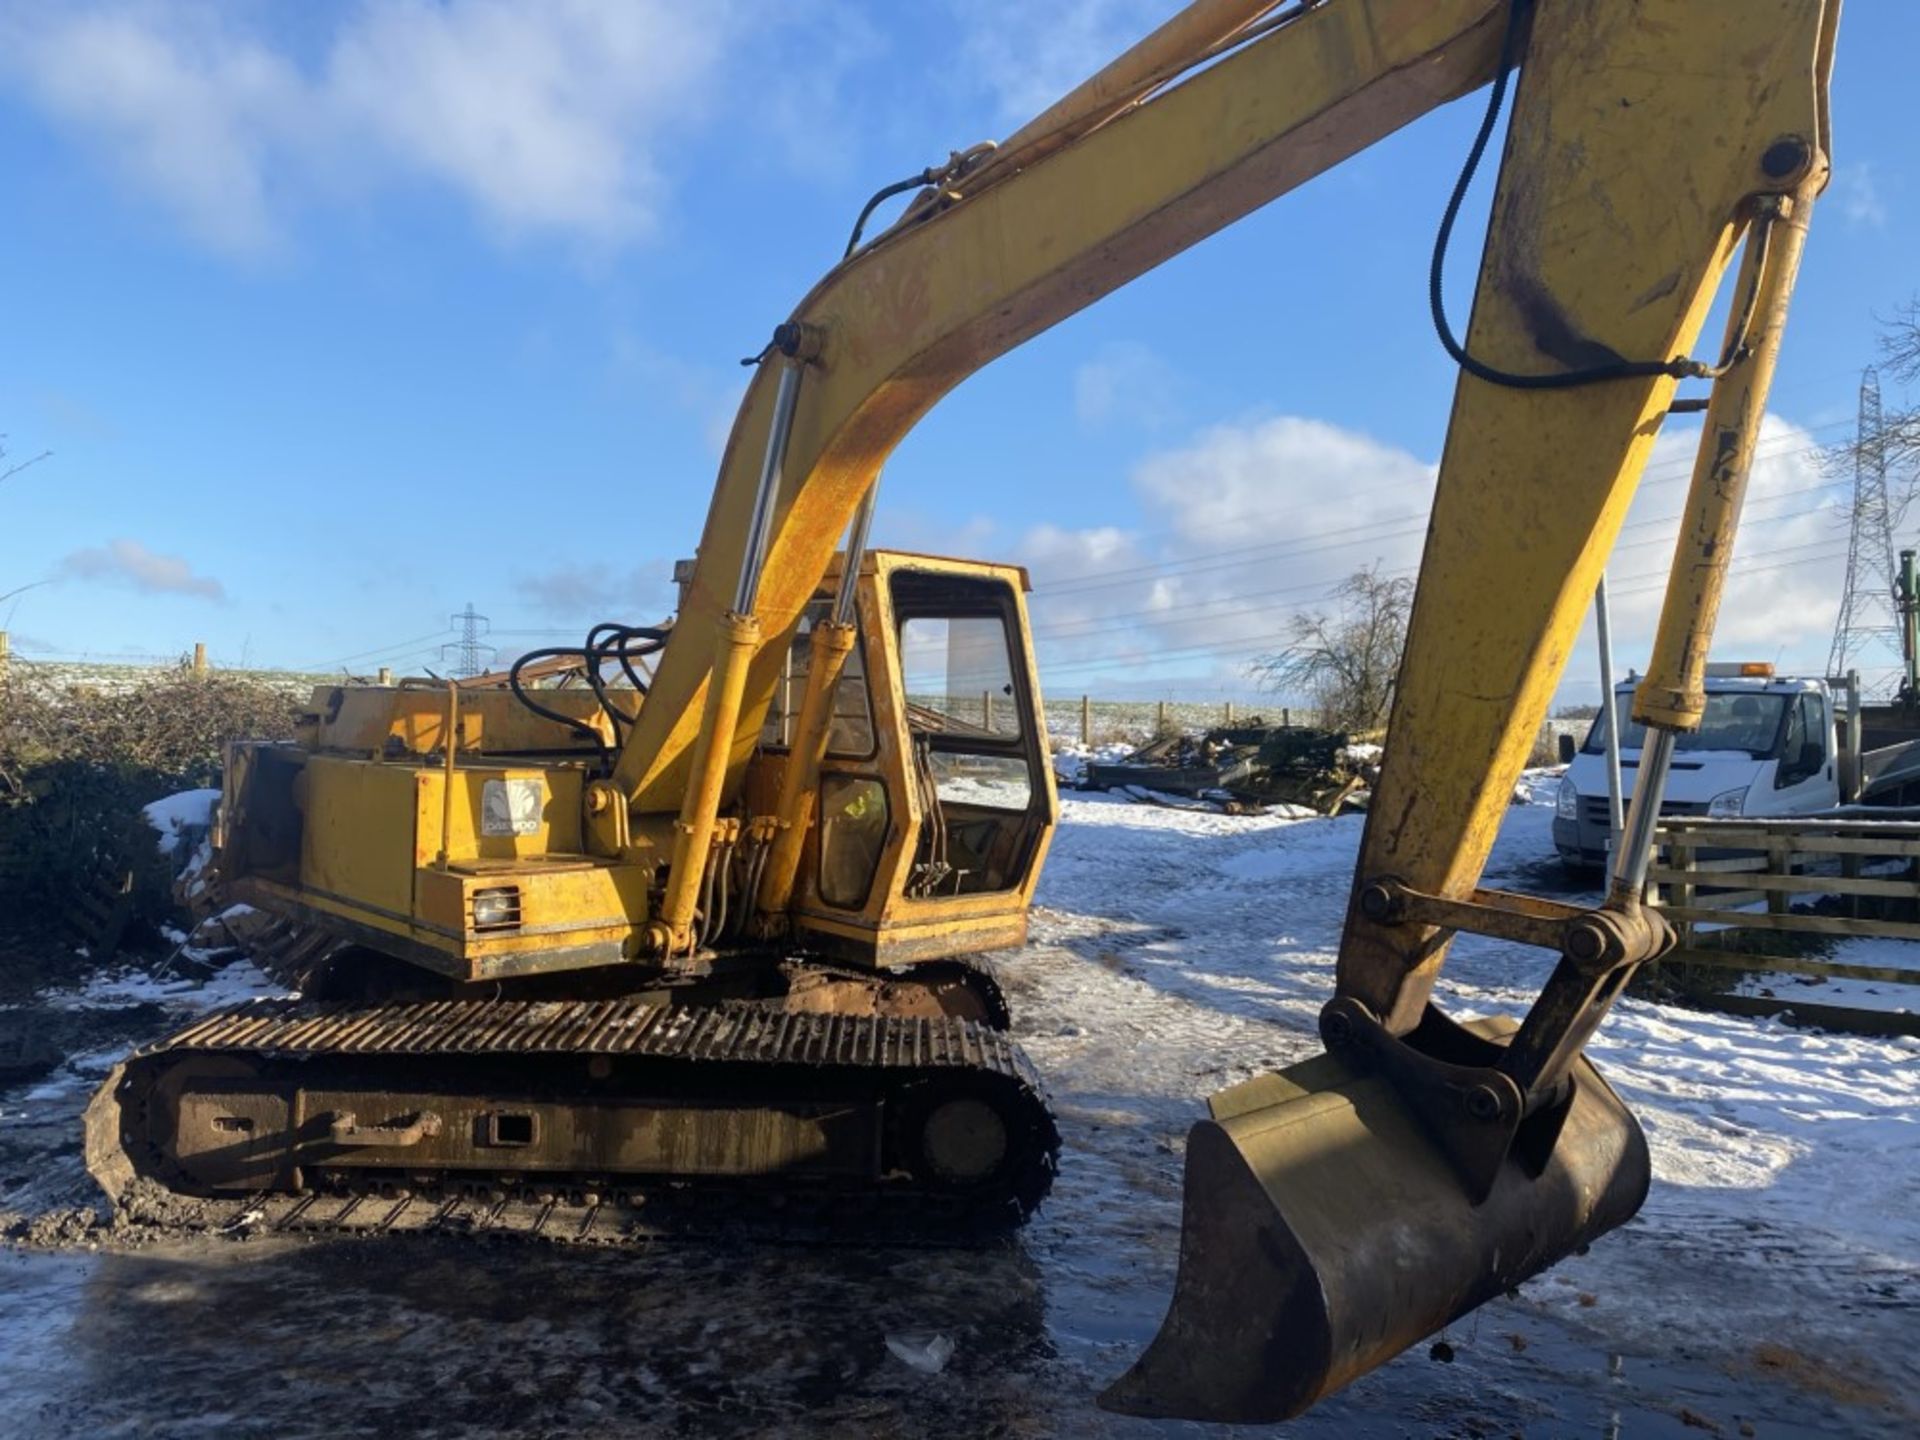 DAEWOO DH130 DIGGER (LOCATION BLACKBURN) (RING FOR COLLECTION DETAILS) (KEYS UNKNOWN) [+ VAT]